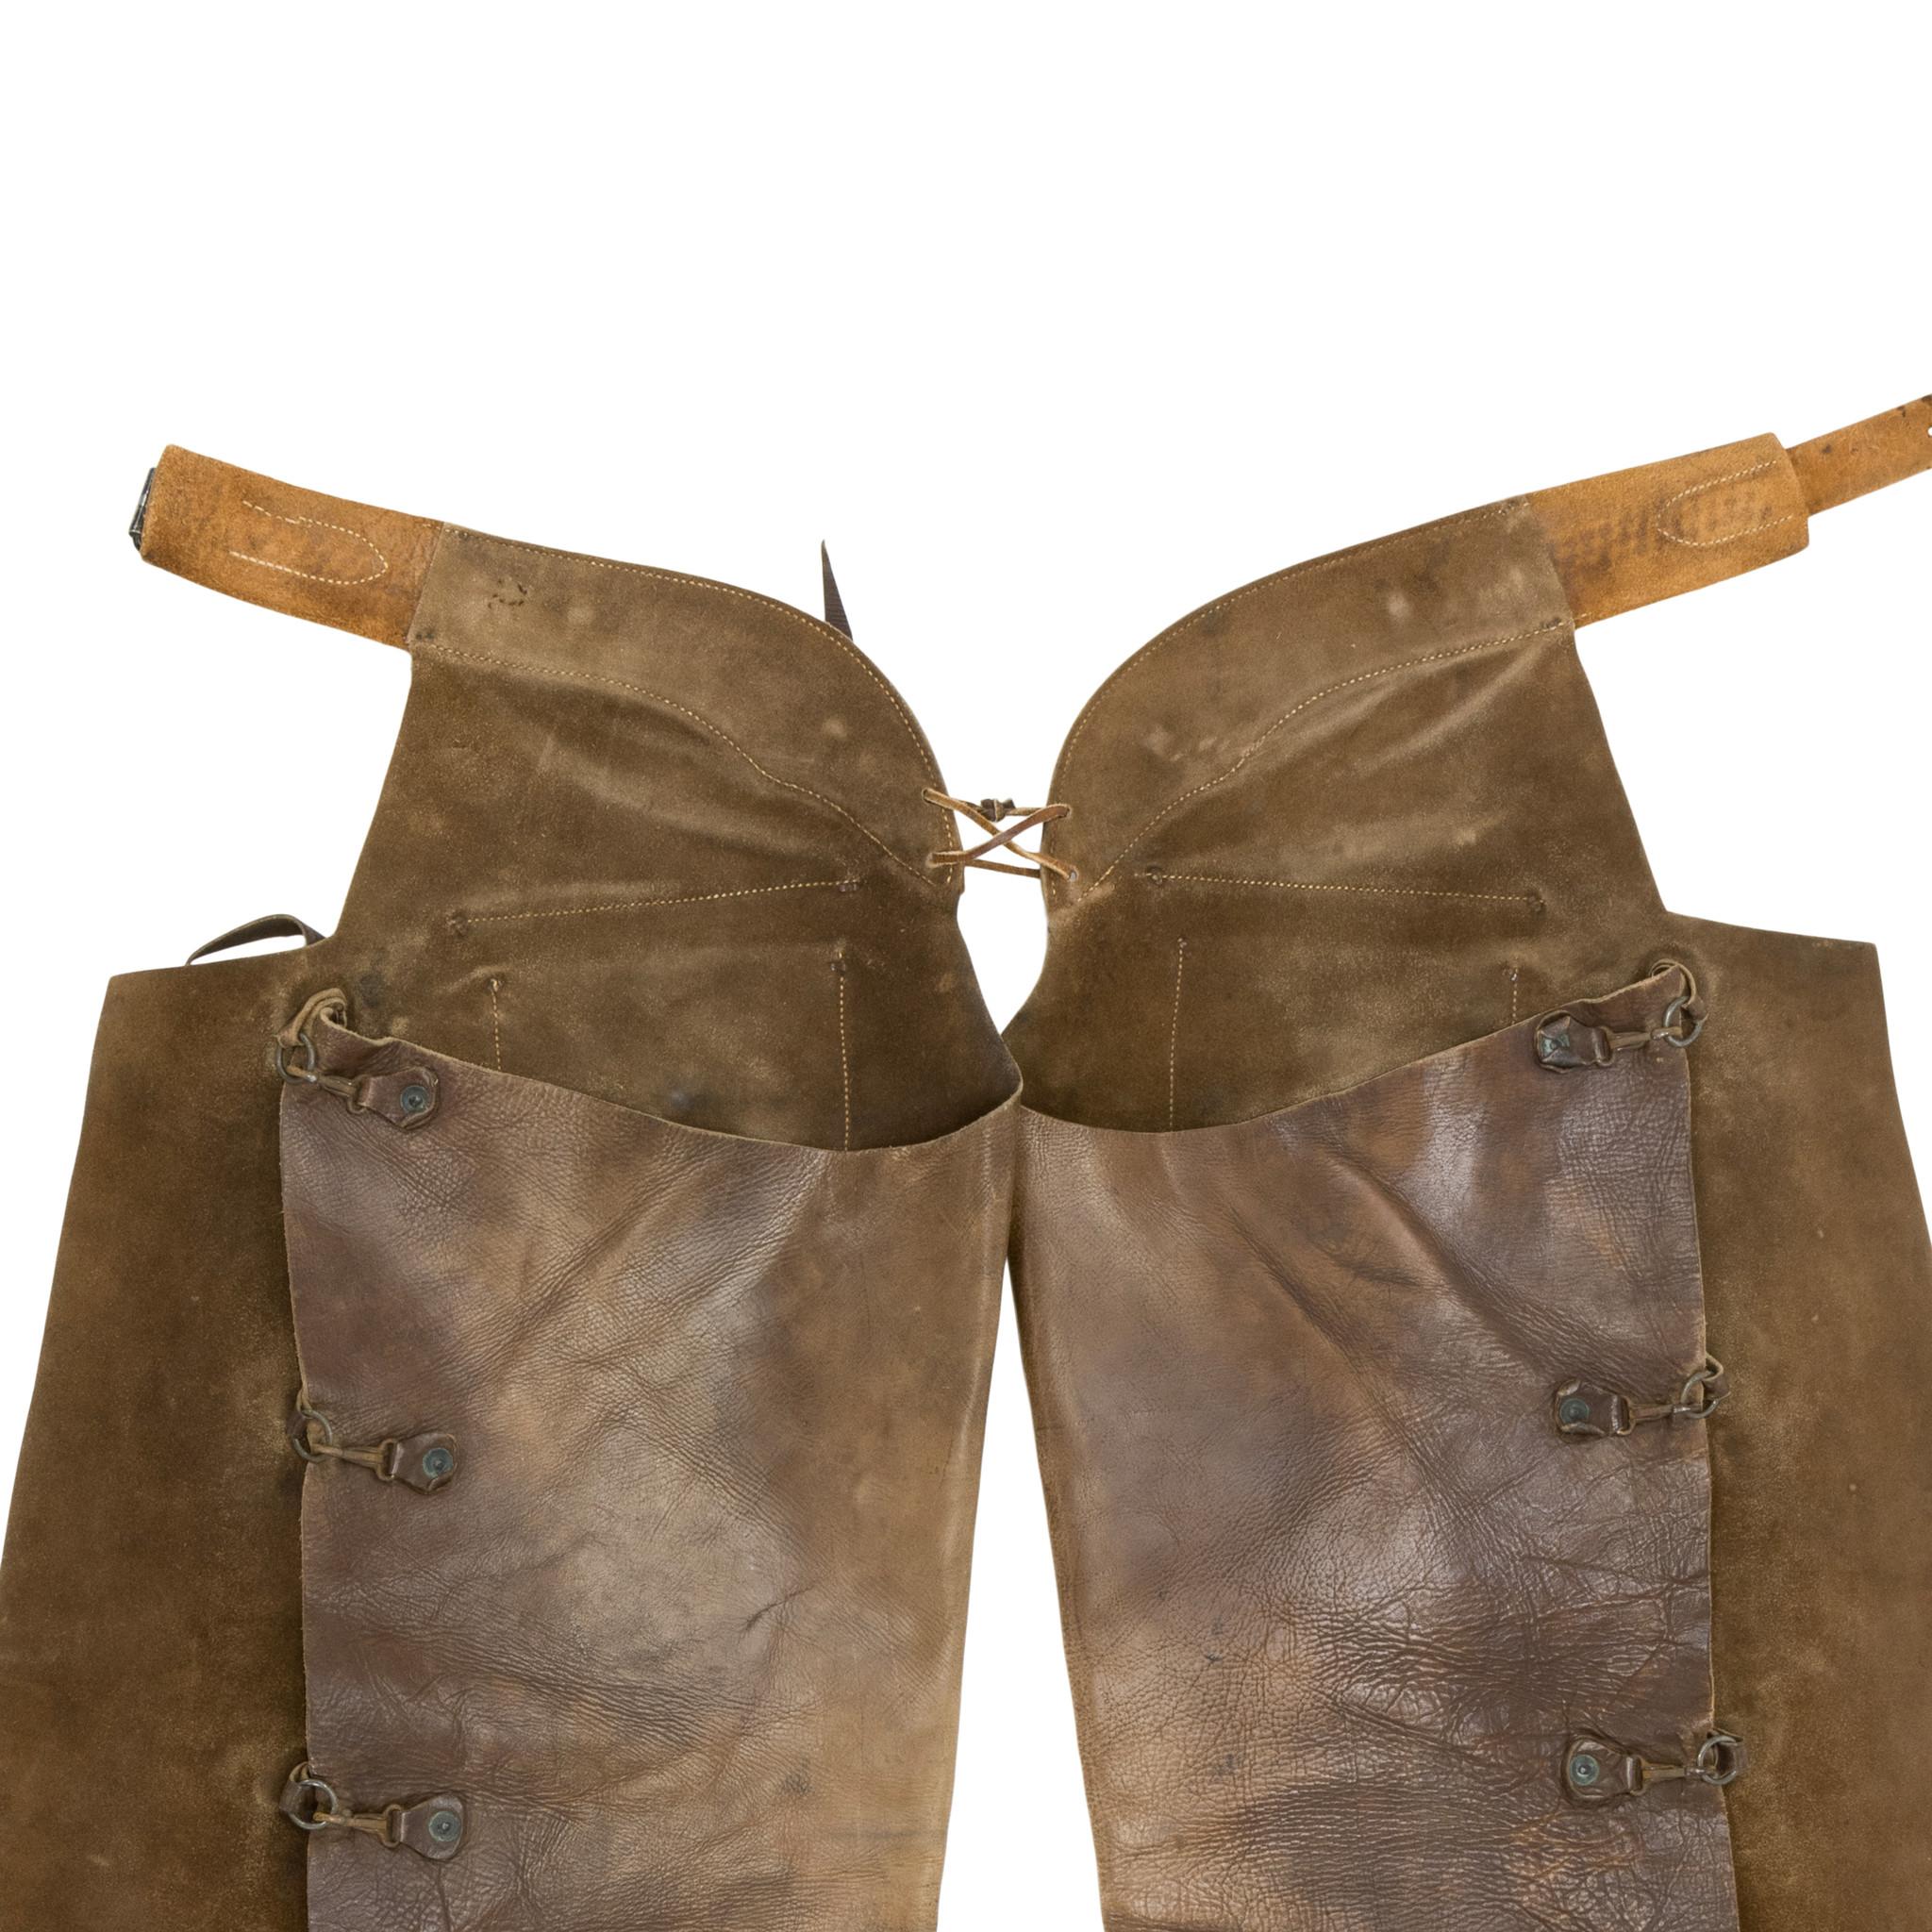  Vintage leather Heiser batwing chaps. With two outside pockets, basketweave stamped belt and metal conchos. Great condition with excellent patina and nice coloring. Would display nicely in a Western style home. Late 20th century. Size: 36